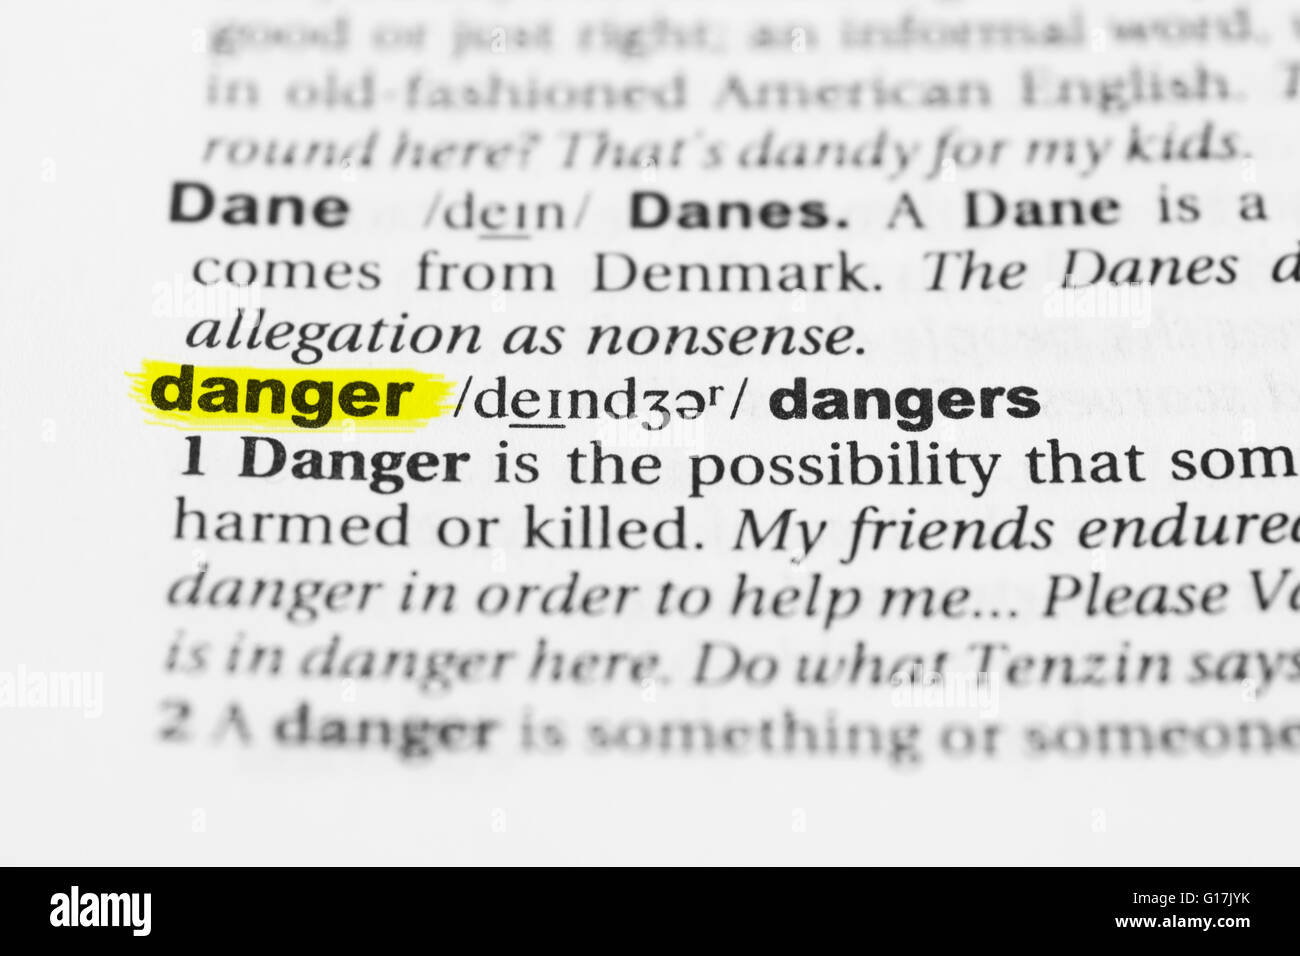 IS definition in American English